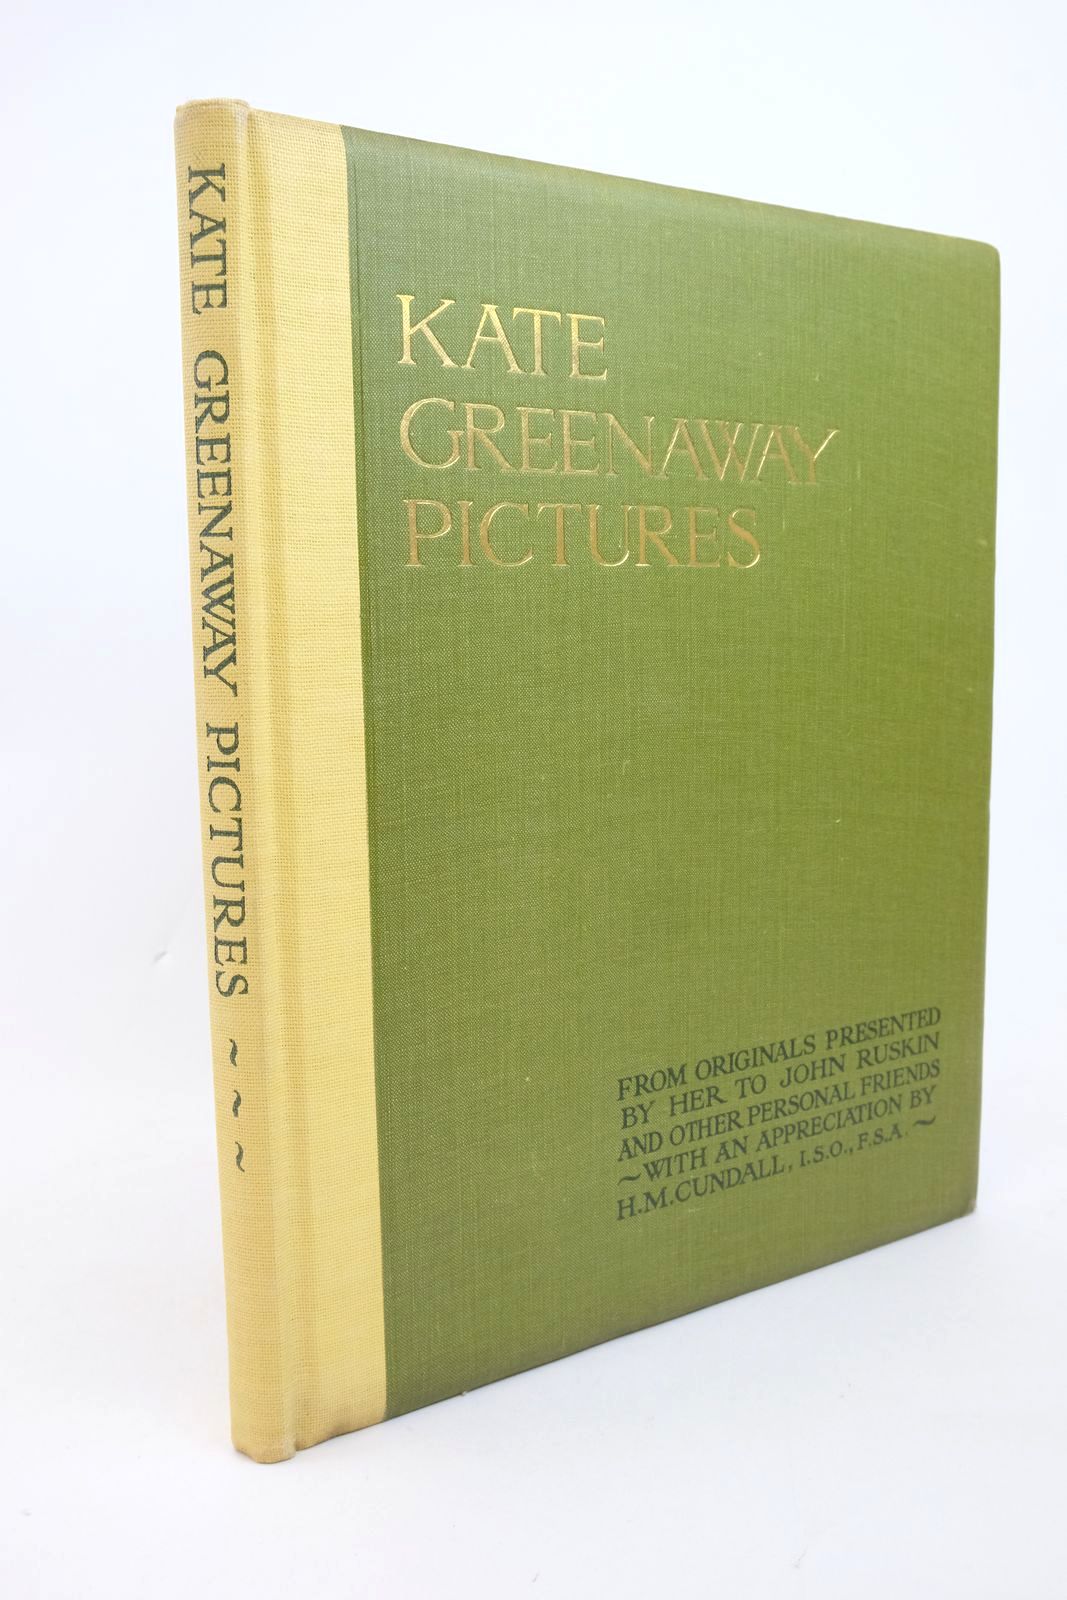 Photo of KATE GREENAWAY PICTURES written by Cundall, H.M. illustrated by Greenaway, Kate published by Frederick Warne & Co Ltd. (STOCK CODE: 1322845)  for sale by Stella & Rose's Books